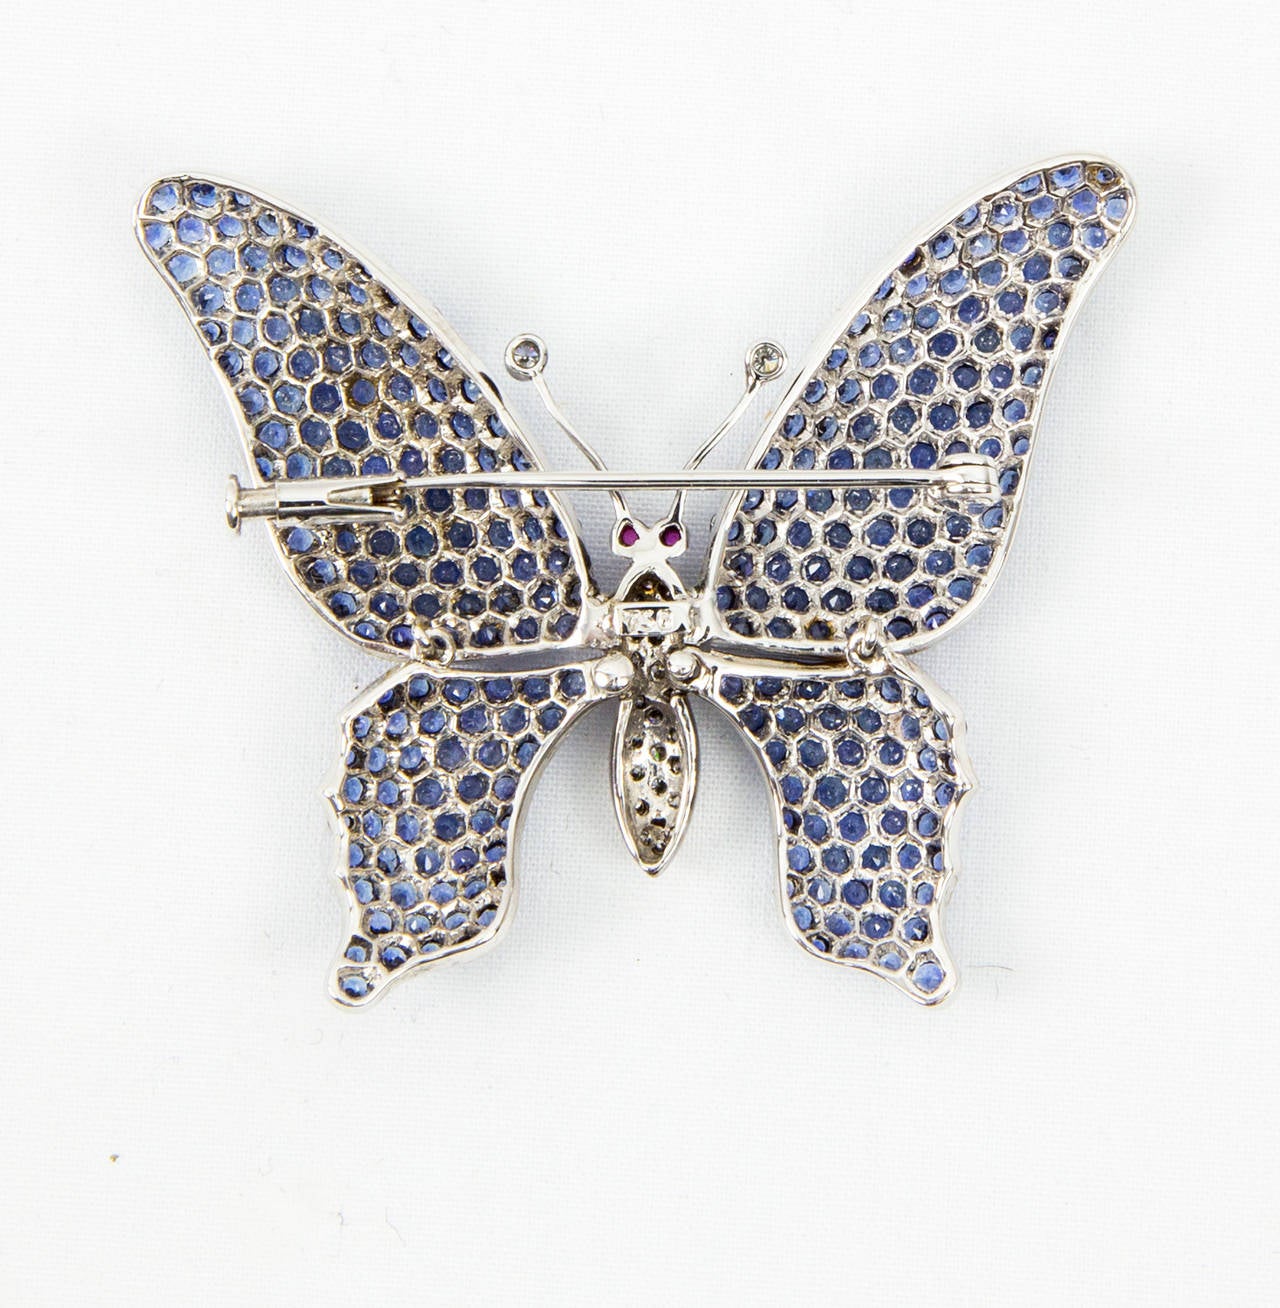 Beautiful Blue Sapphire and Diamond Butterfly; micro-set with diamond-cut sapphires, body and antennae set with brilliant-cut diamonds, eyes set with pink cabochon sapphires. Handmade in 18k white gold; tremblant wings ; marked on back: 750